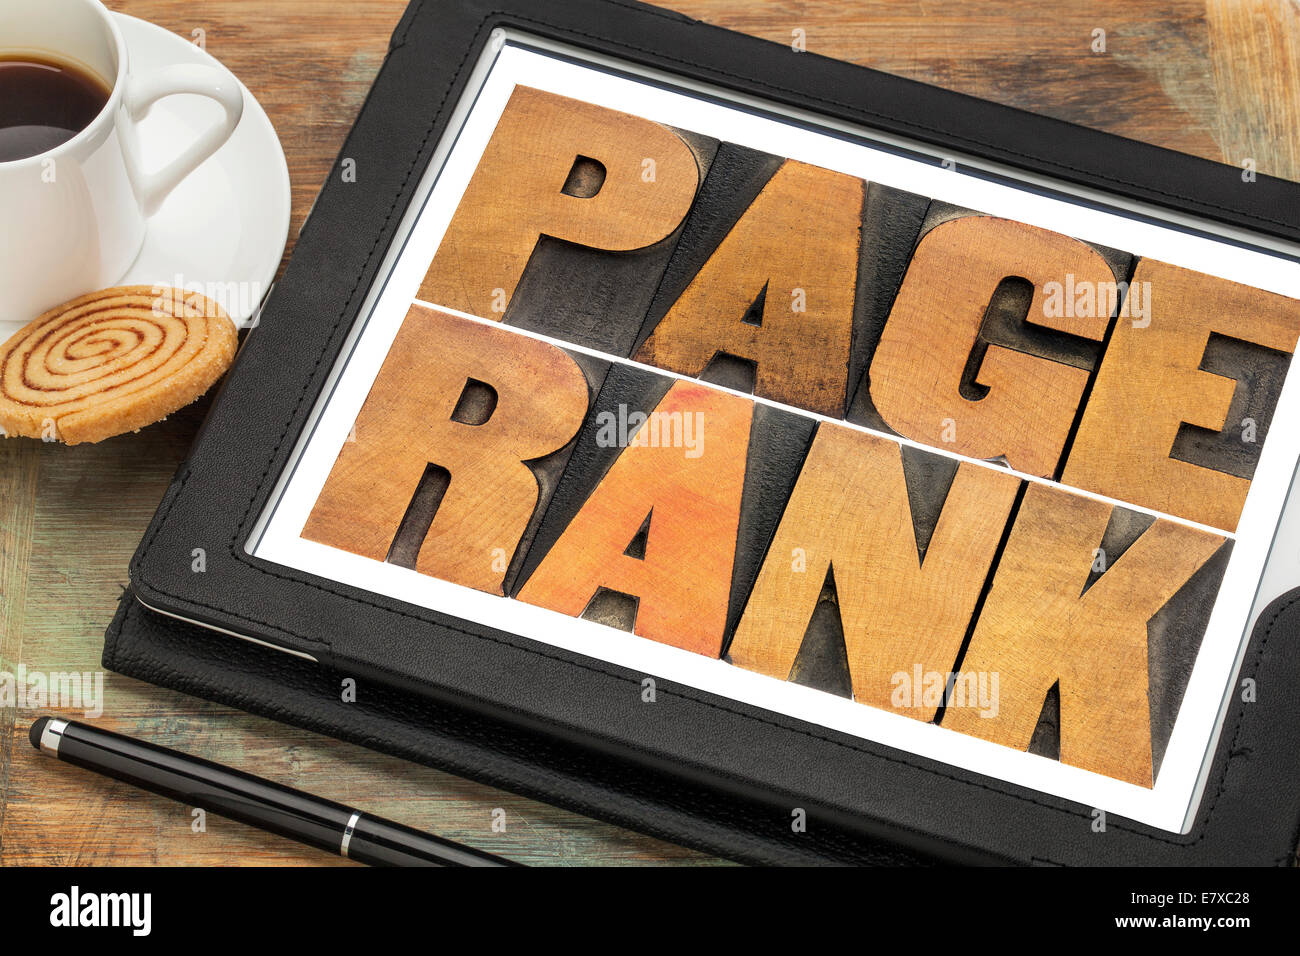 page rank - text in vintage letterpress wood type on a digital tablet - internet and SEO concept Stock Photo